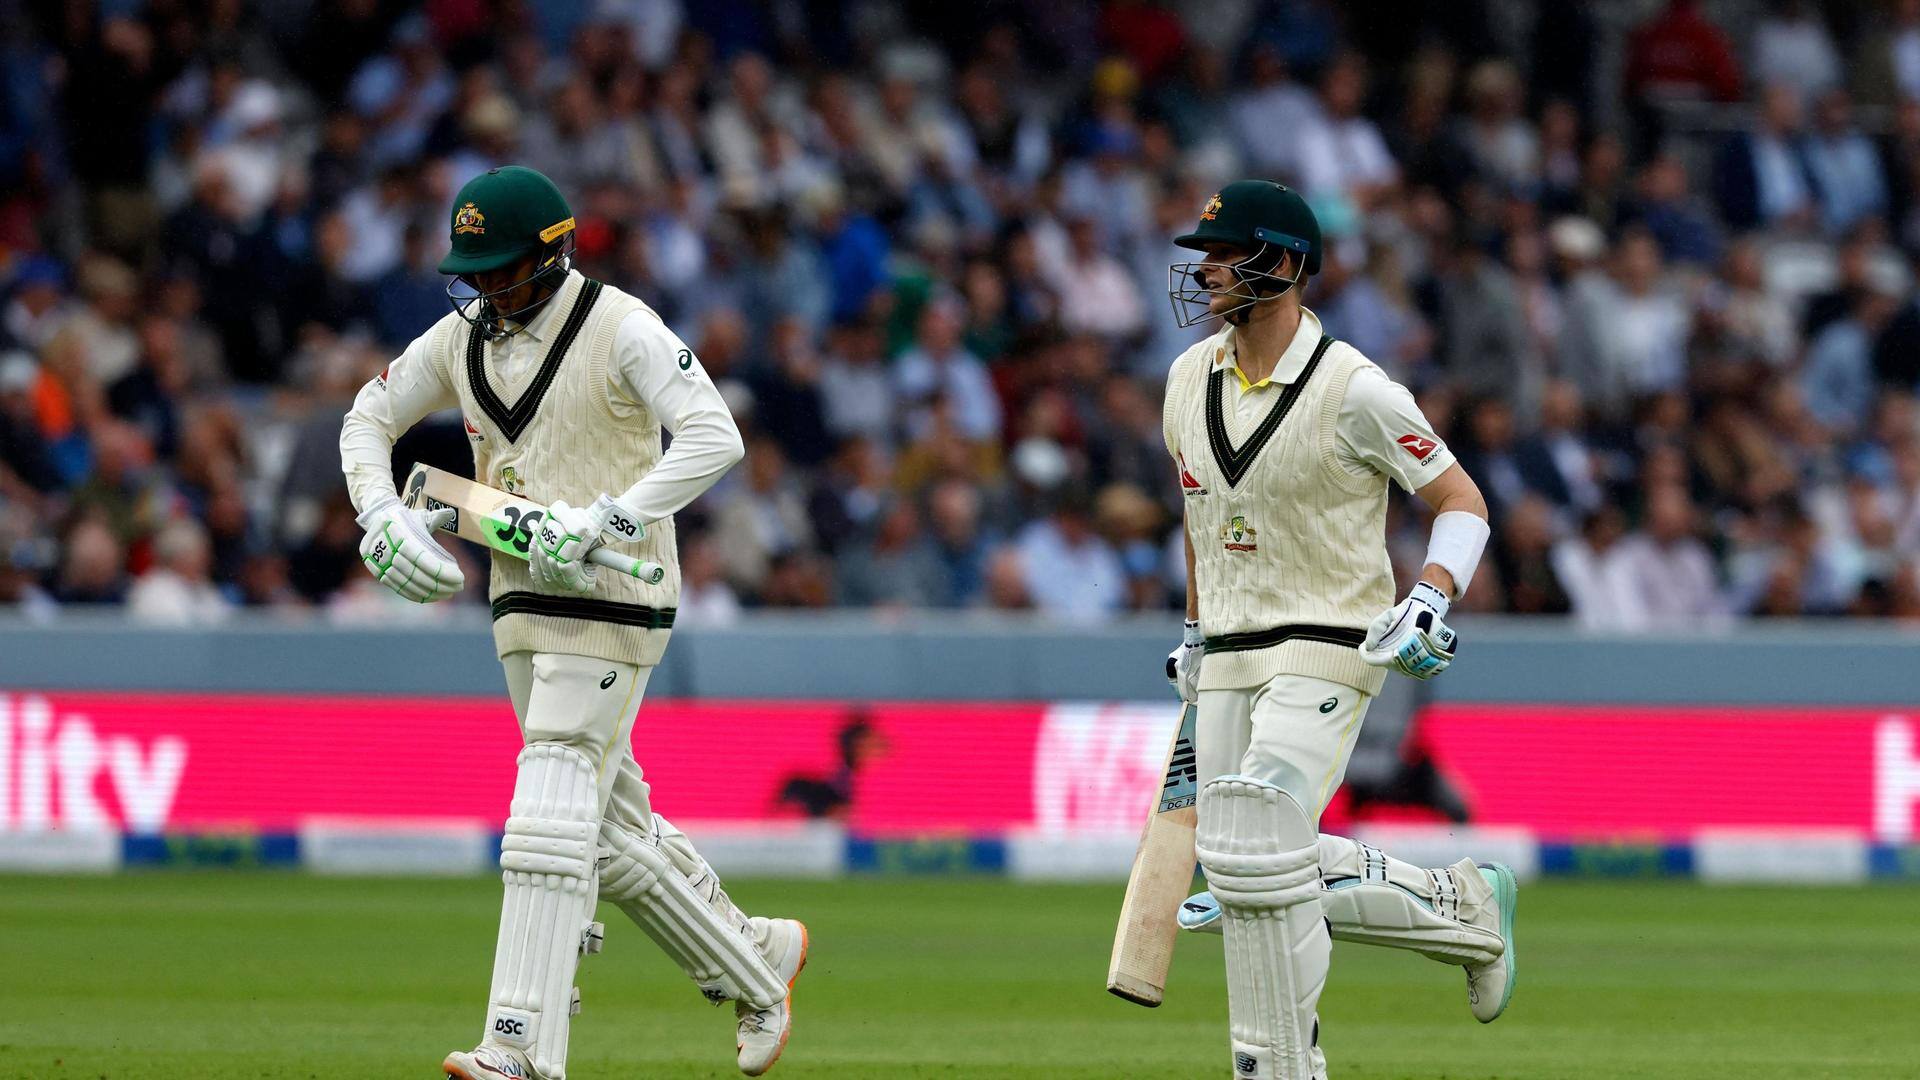 2nd Ashes Test, Day 3: Australia placed strongly at Lord's